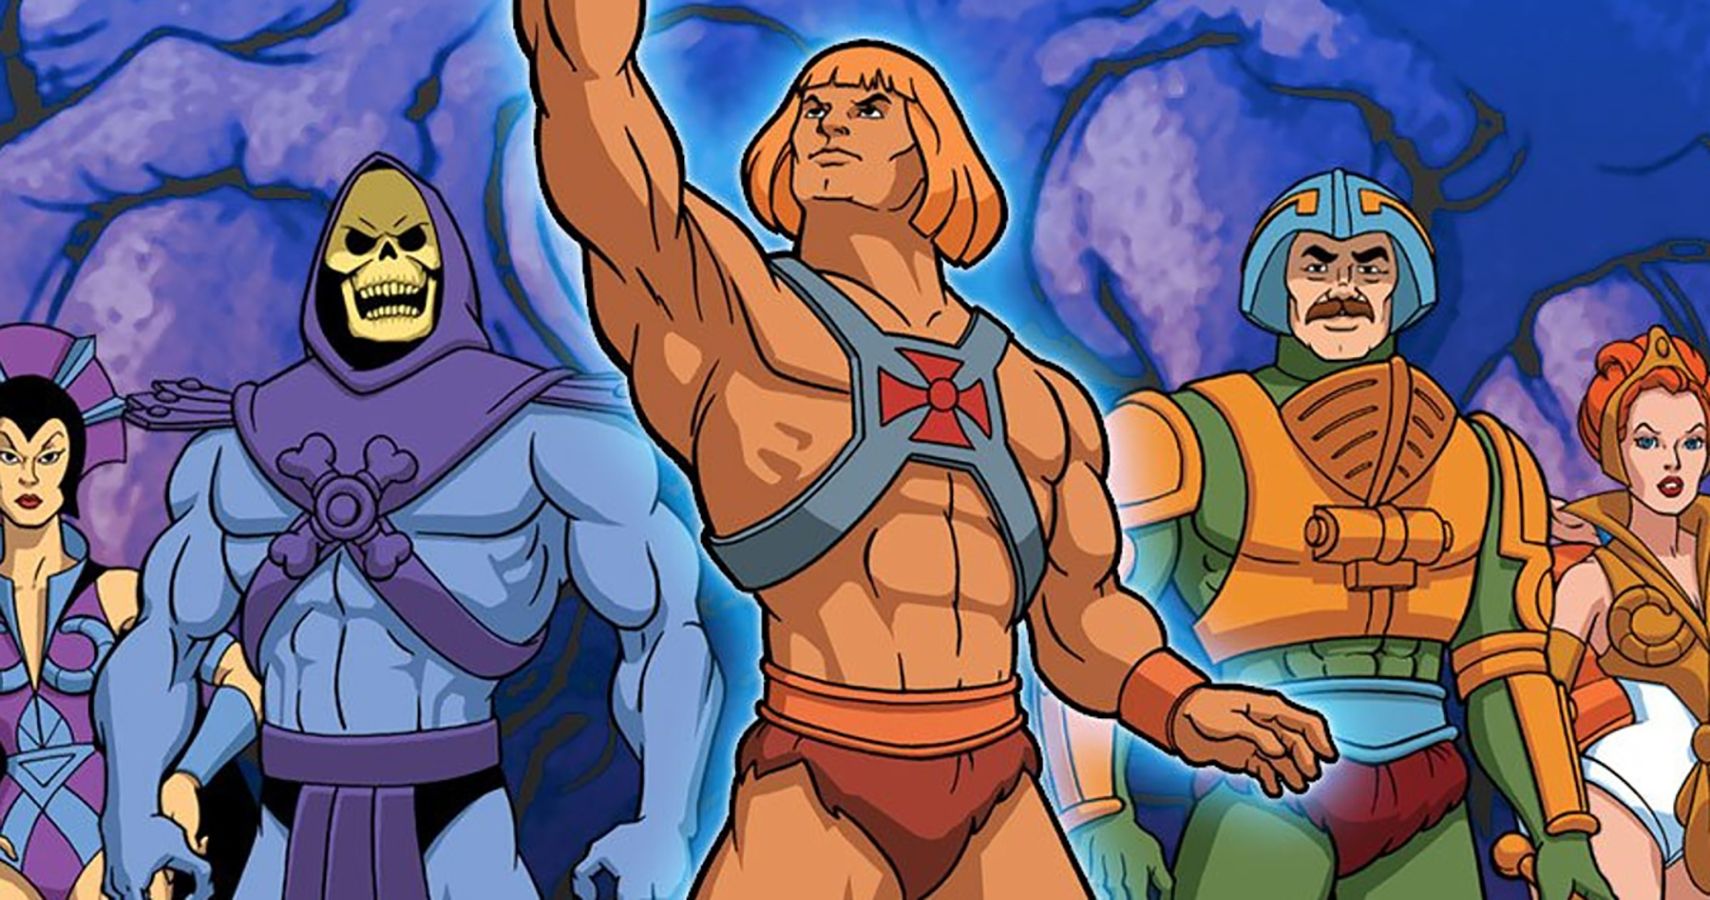 Top 10 He-Man And The Masters Of The Universe Episodes (According To IMDb)